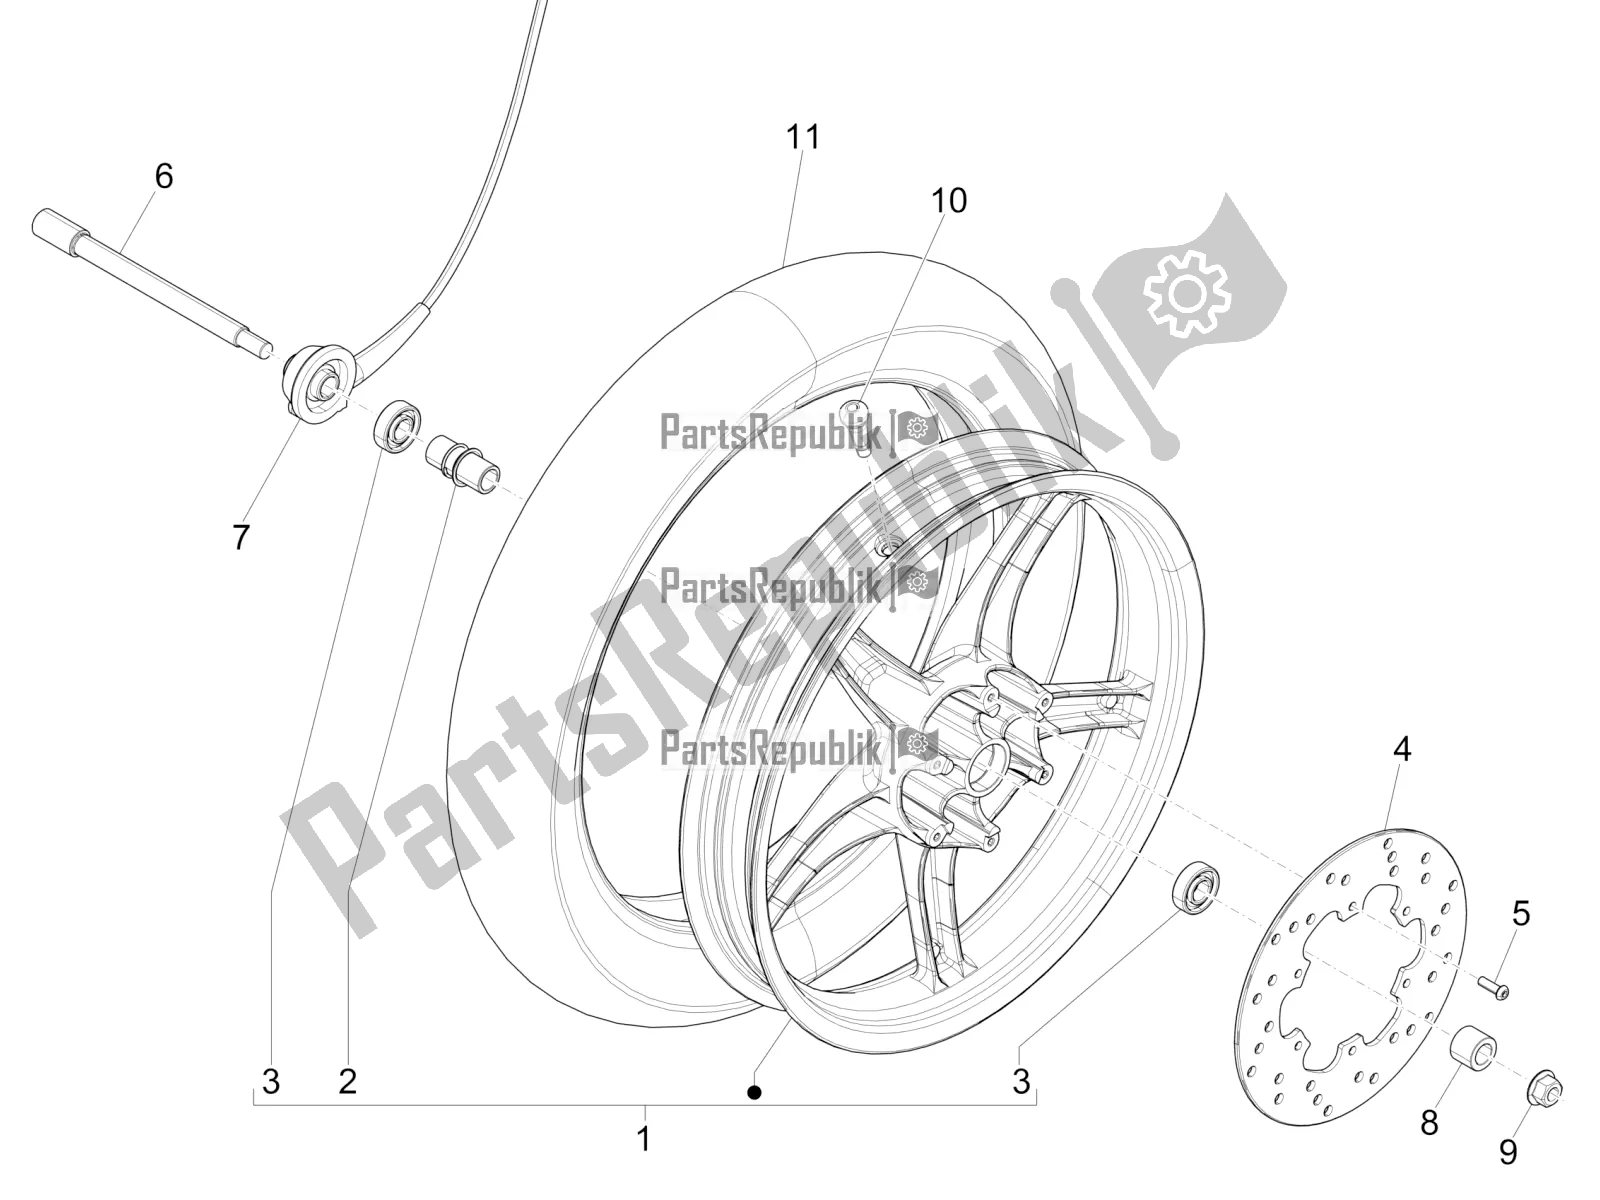 All parts for the Front Wheel of the Piaggio Liberty 125 4T Iget Corporate E4 2017-2019 Emea 2019